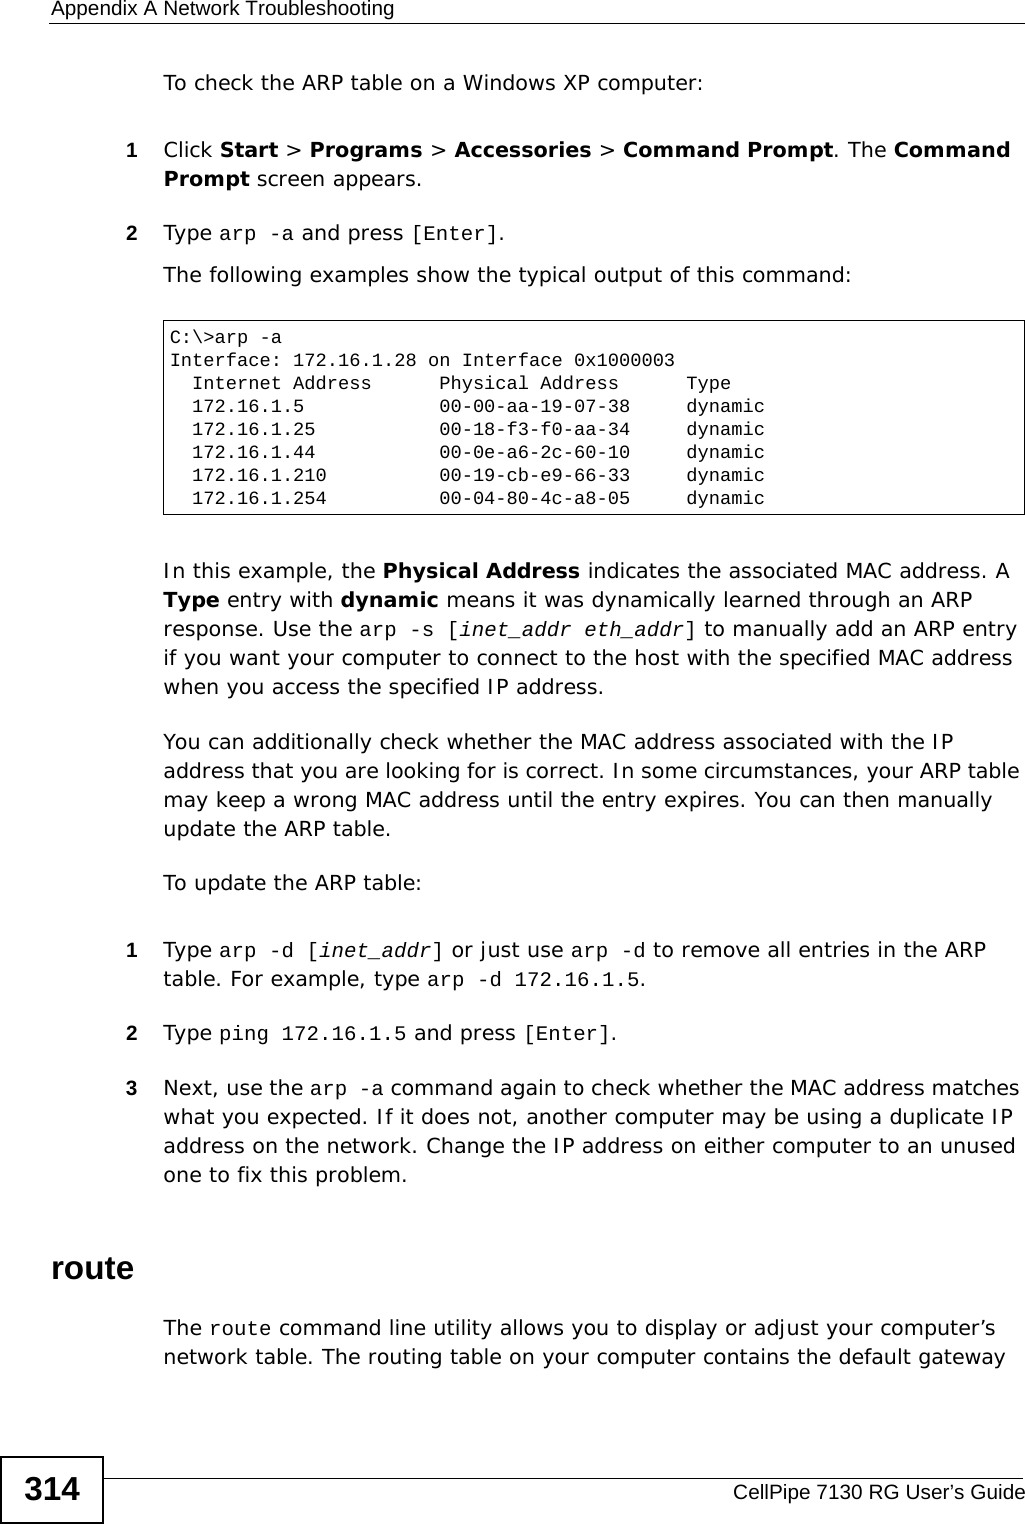 Appendix A Network TroubleshootingCellPipe 7130 RG User’s Guide314To check the ARP table on a Windows XP computer:1Click Start &gt; Programs &gt; Accessories &gt; Command Prompt. The Command Prompt screen appears.2Type arp -a and press [Enter].The following examples show the typical output of this command:  In this example, the Physical Address indicates the associated MAC address. A Type entry with dynamic means it was dynamically learned through an ARP response. Use the arp -s [inet_addr eth_addr] to manually add an ARP entry if you want your computer to connect to the host with the specified MAC address when you access the specified IP address.You can additionally check whether the MAC address associated with the IP address that you are looking for is correct. In some circumstances, your ARP table may keep a wrong MAC address until the entry expires. You can then manually update the ARP table. To update the ARP table:1Type arp -d [inet_addr] or just use arp -d to remove all entries in the ARP table. For example, type arp -d 172.16.1.5.2Type ping 172.16.1.5 and press [Enter].3Next, use the arp -a command again to check whether the MAC address matches what you expected. If it does not, another computer may be using a duplicate IP address on the network. Change the IP address on either computer to an unused one to fix this problem.routeThe route command line utility allows you to display or adjust your computer’s network table. The routing table on your computer contains the default gateway C:\&gt;arp -aInterface: 172.16.1.28 on Interface 0x1000003  Internet Address      Physical Address      Type  172.16.1.5            00-00-aa-19-07-38     dynamic  172.16.1.25           00-18-f3-f0-aa-34     dynamic  172.16.1.44           00-0e-a6-2c-60-10     dynamic  172.16.1.210          00-19-cb-e9-66-33     dynamic  172.16.1.254          00-04-80-4c-a8-05     dynamic